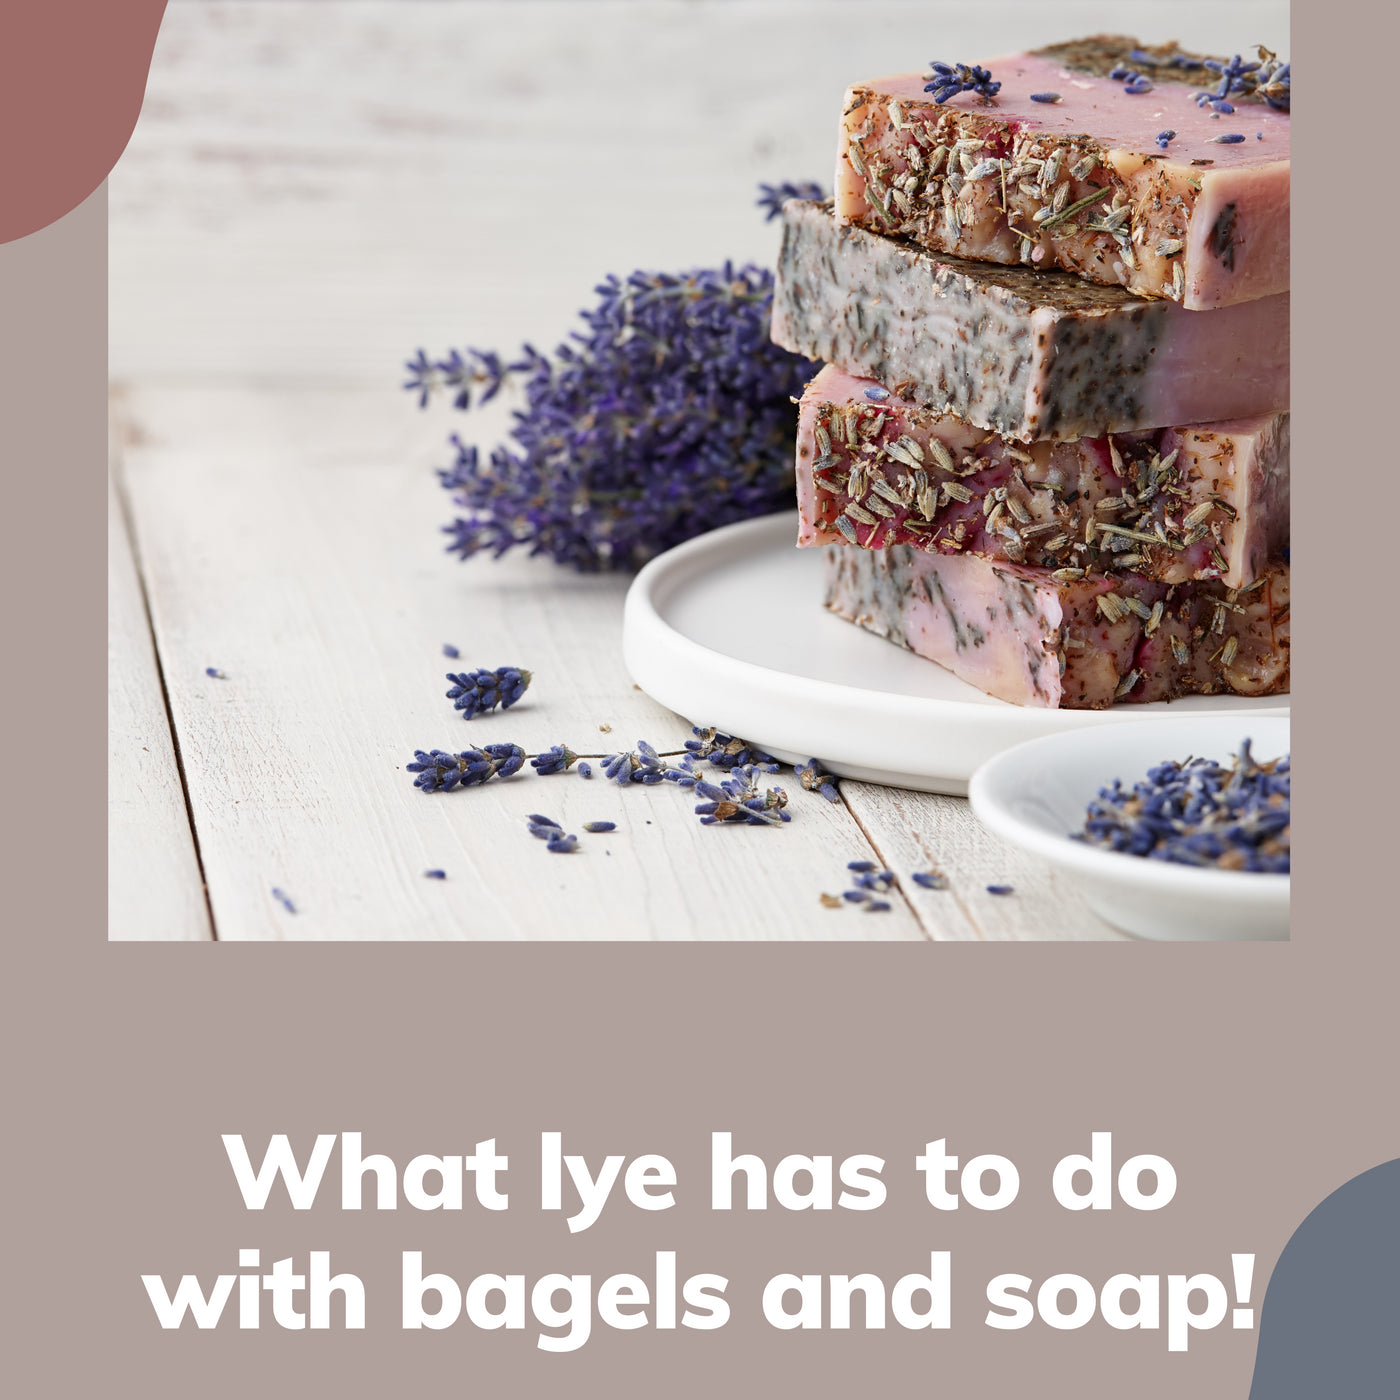 Why do you need lye to make soap? (FAQS)